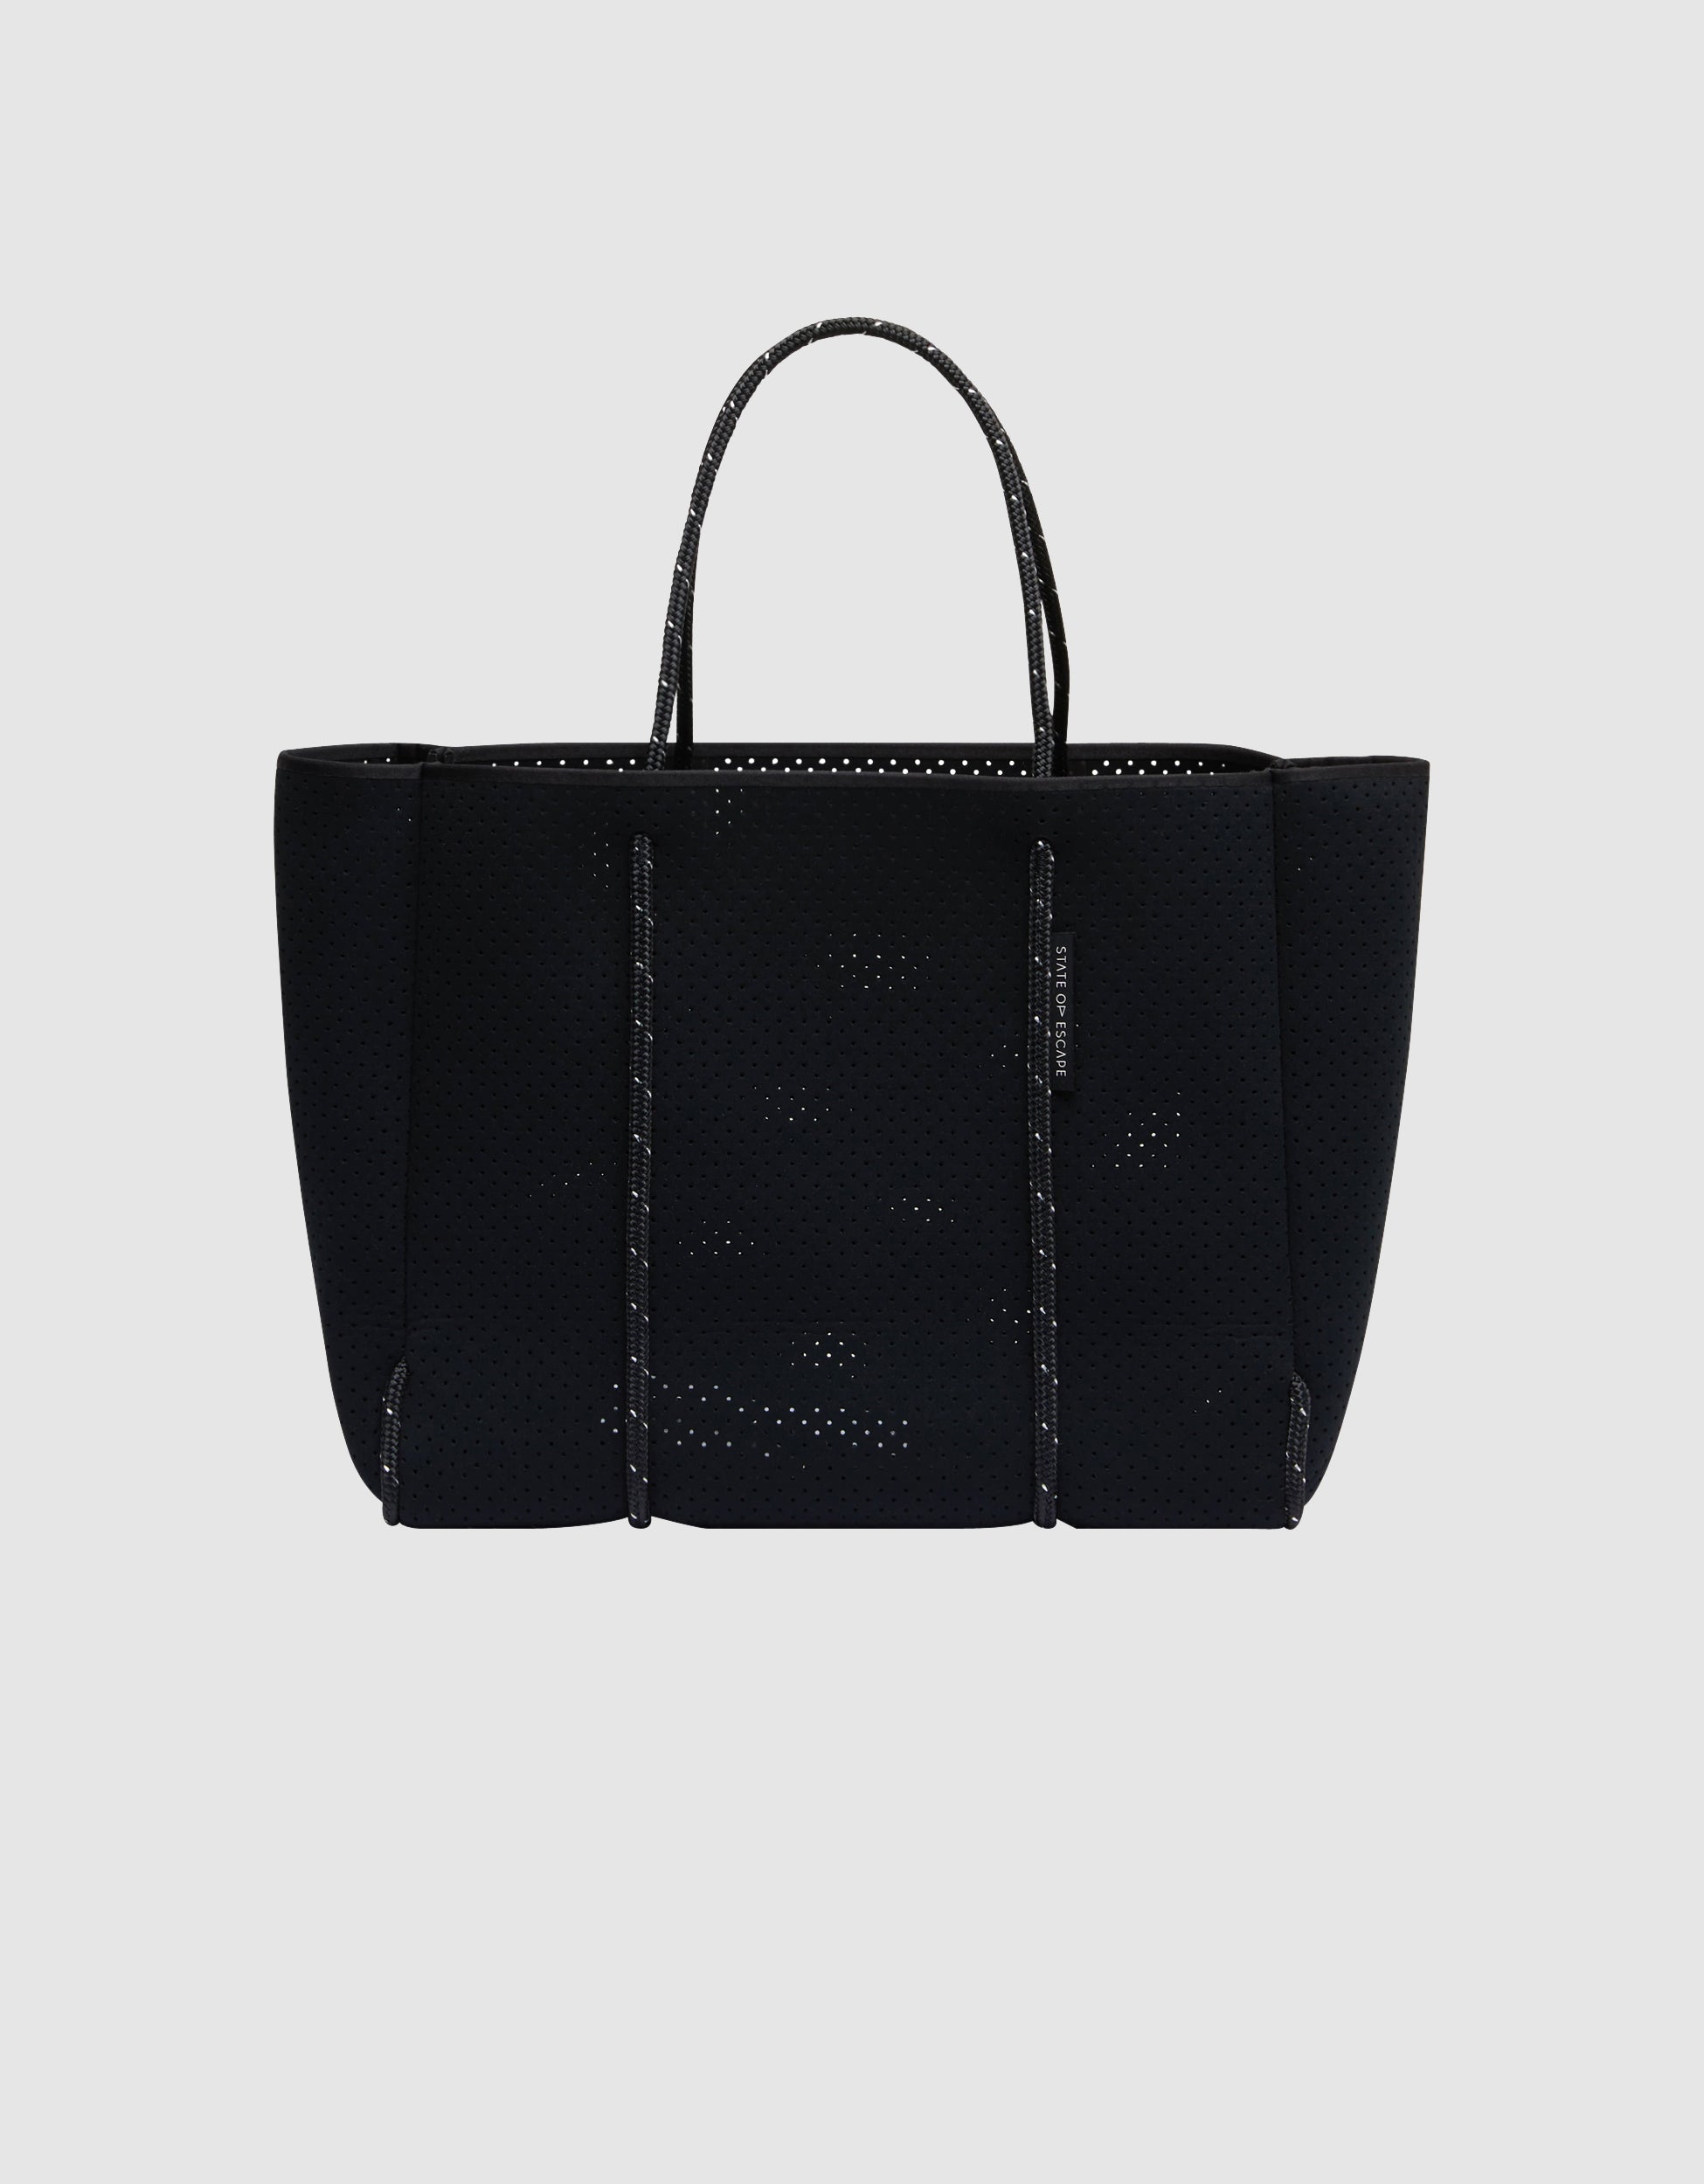 Flying Solo tote in highlight fleck black – State of Escape